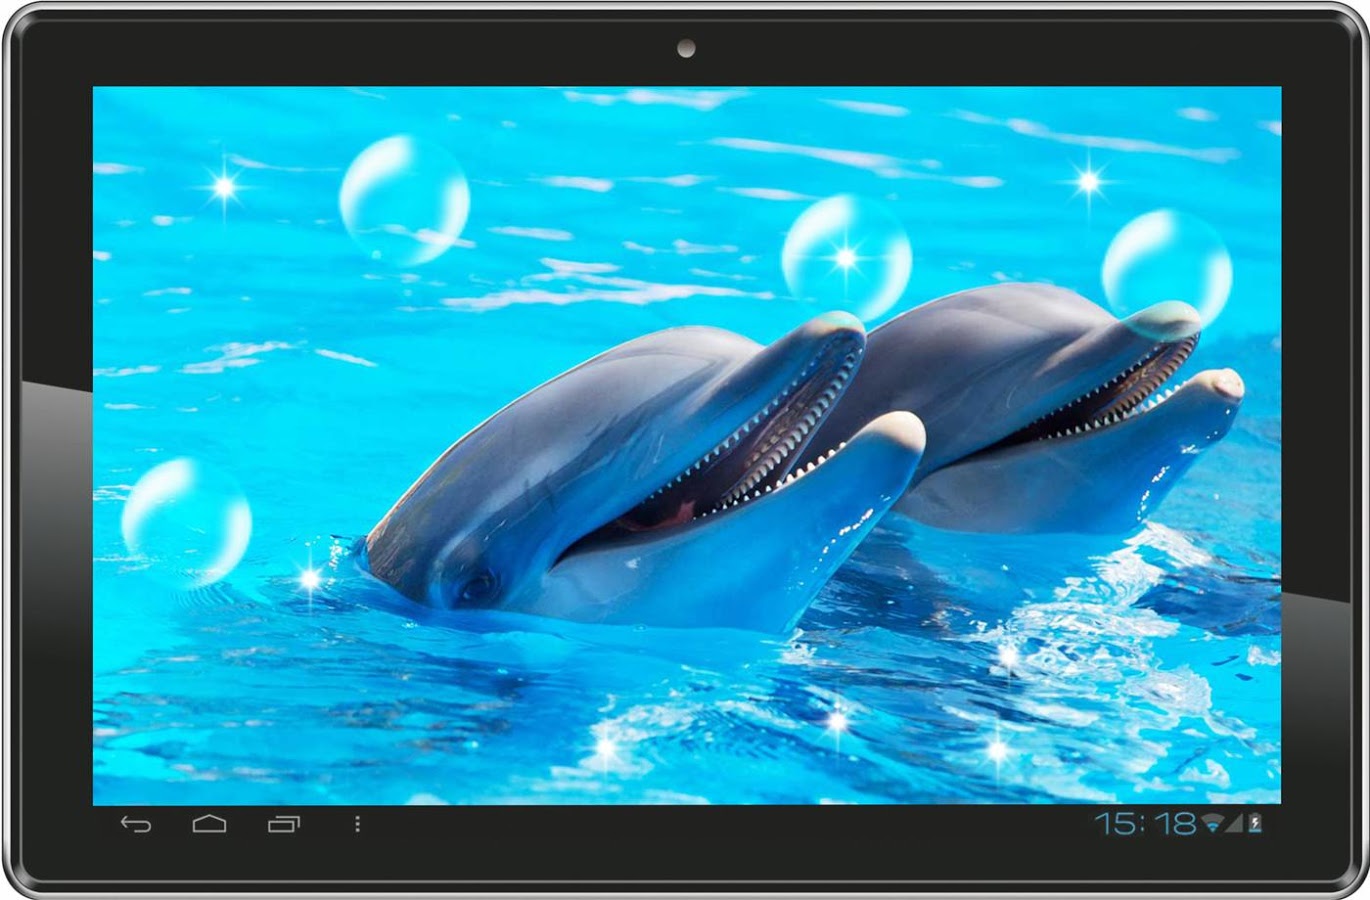 Dolphin Hq Live Wallpaper Android Apps On Google Play